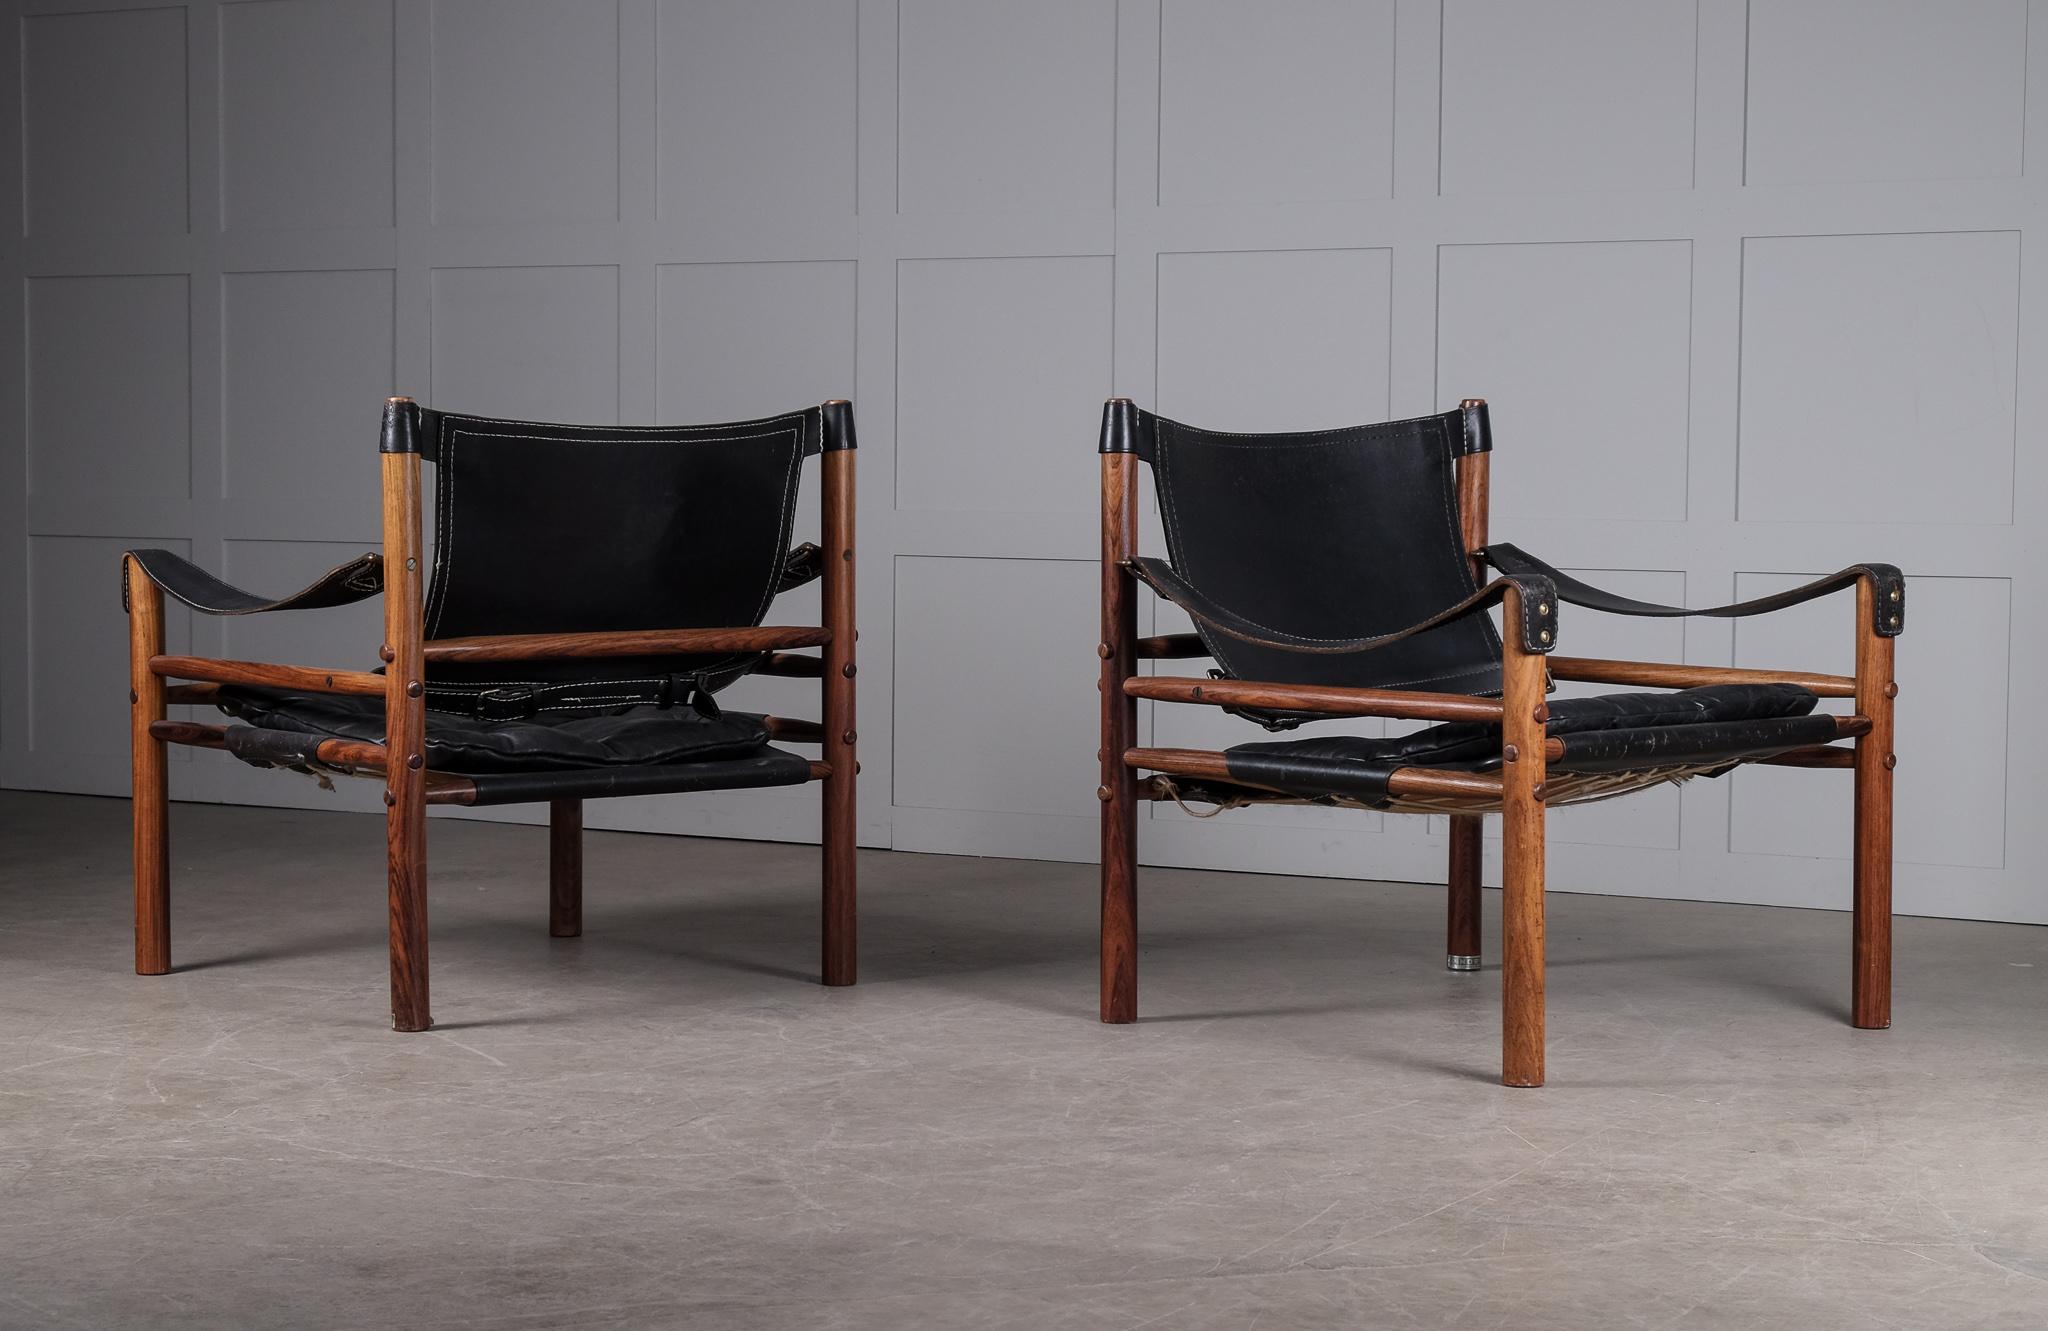 Pair of safari chairs model Sirocco in good condition with original black leather.
Designed by Arne Norell, produced by Arne Norell AB in Aneby, Sweden, 1960s.
  




  